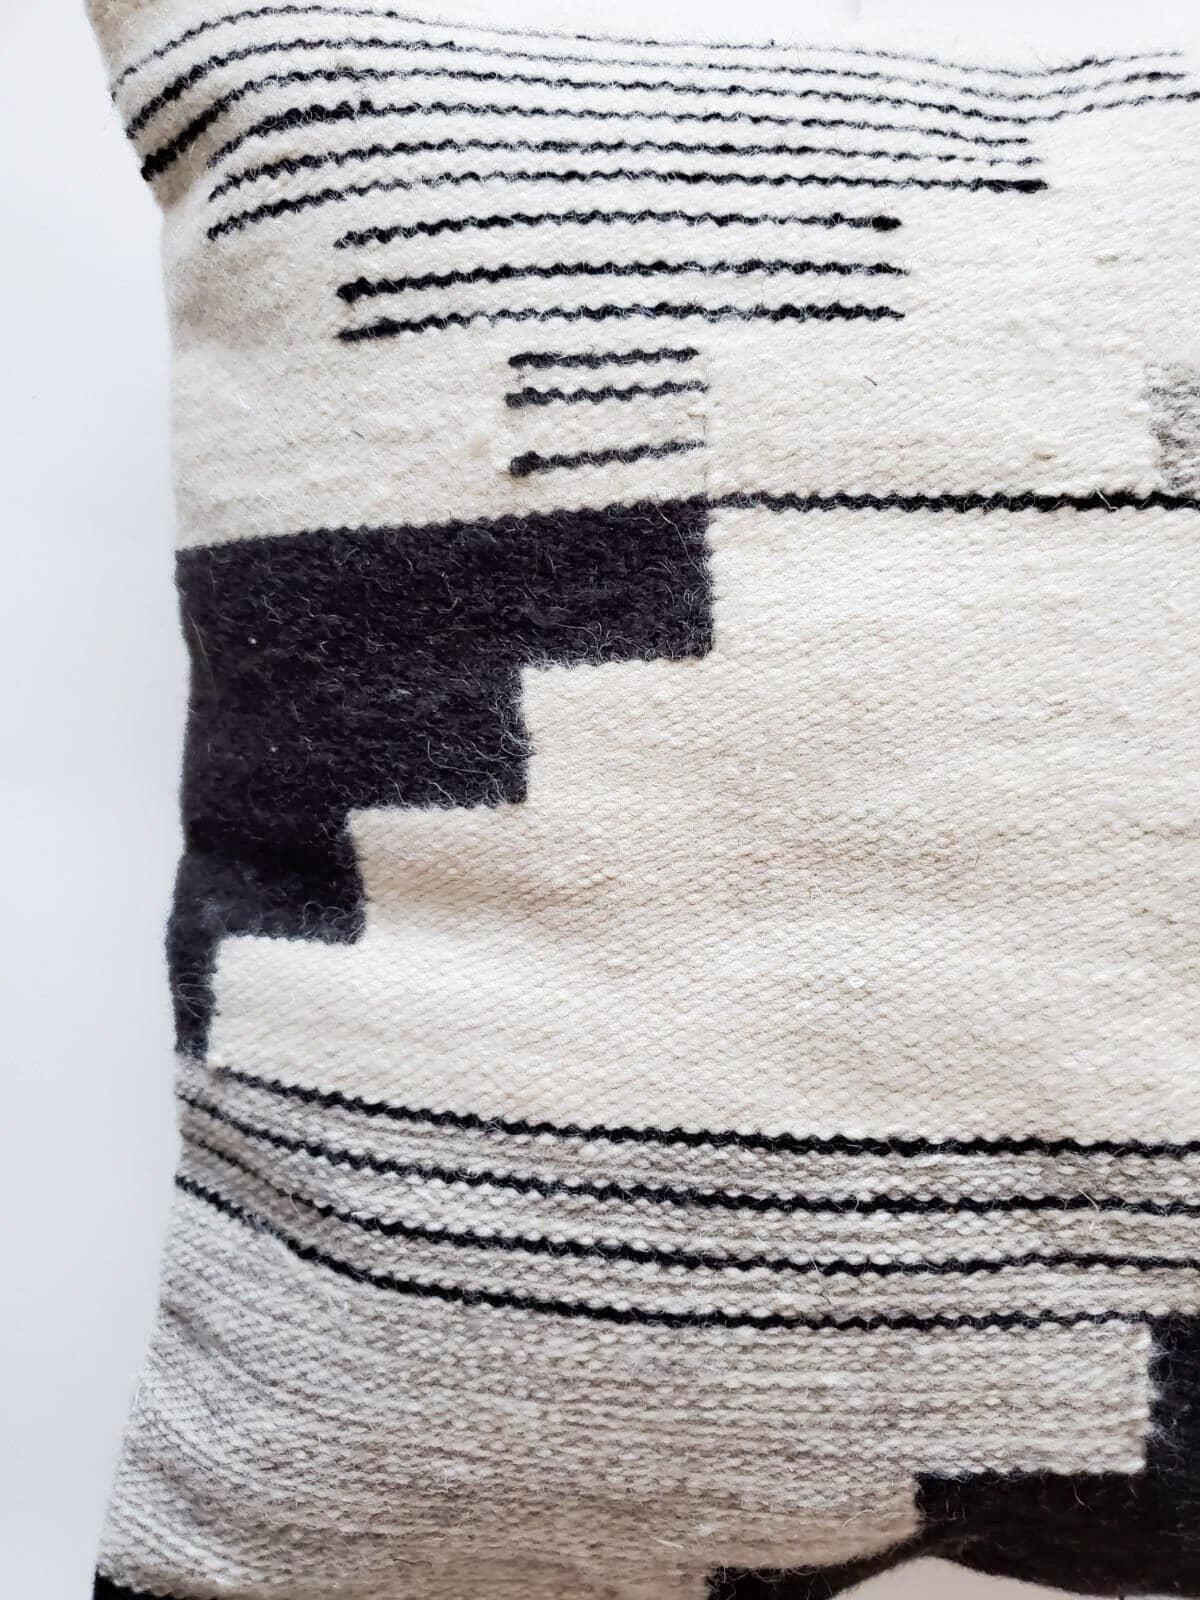 Product information
Material: Natural Wool 
The back is a fabric with a hidden zipper 
Handwoven on a pedal loom
Insert is not included 

Colour:
Cream 
Black
Gray
 